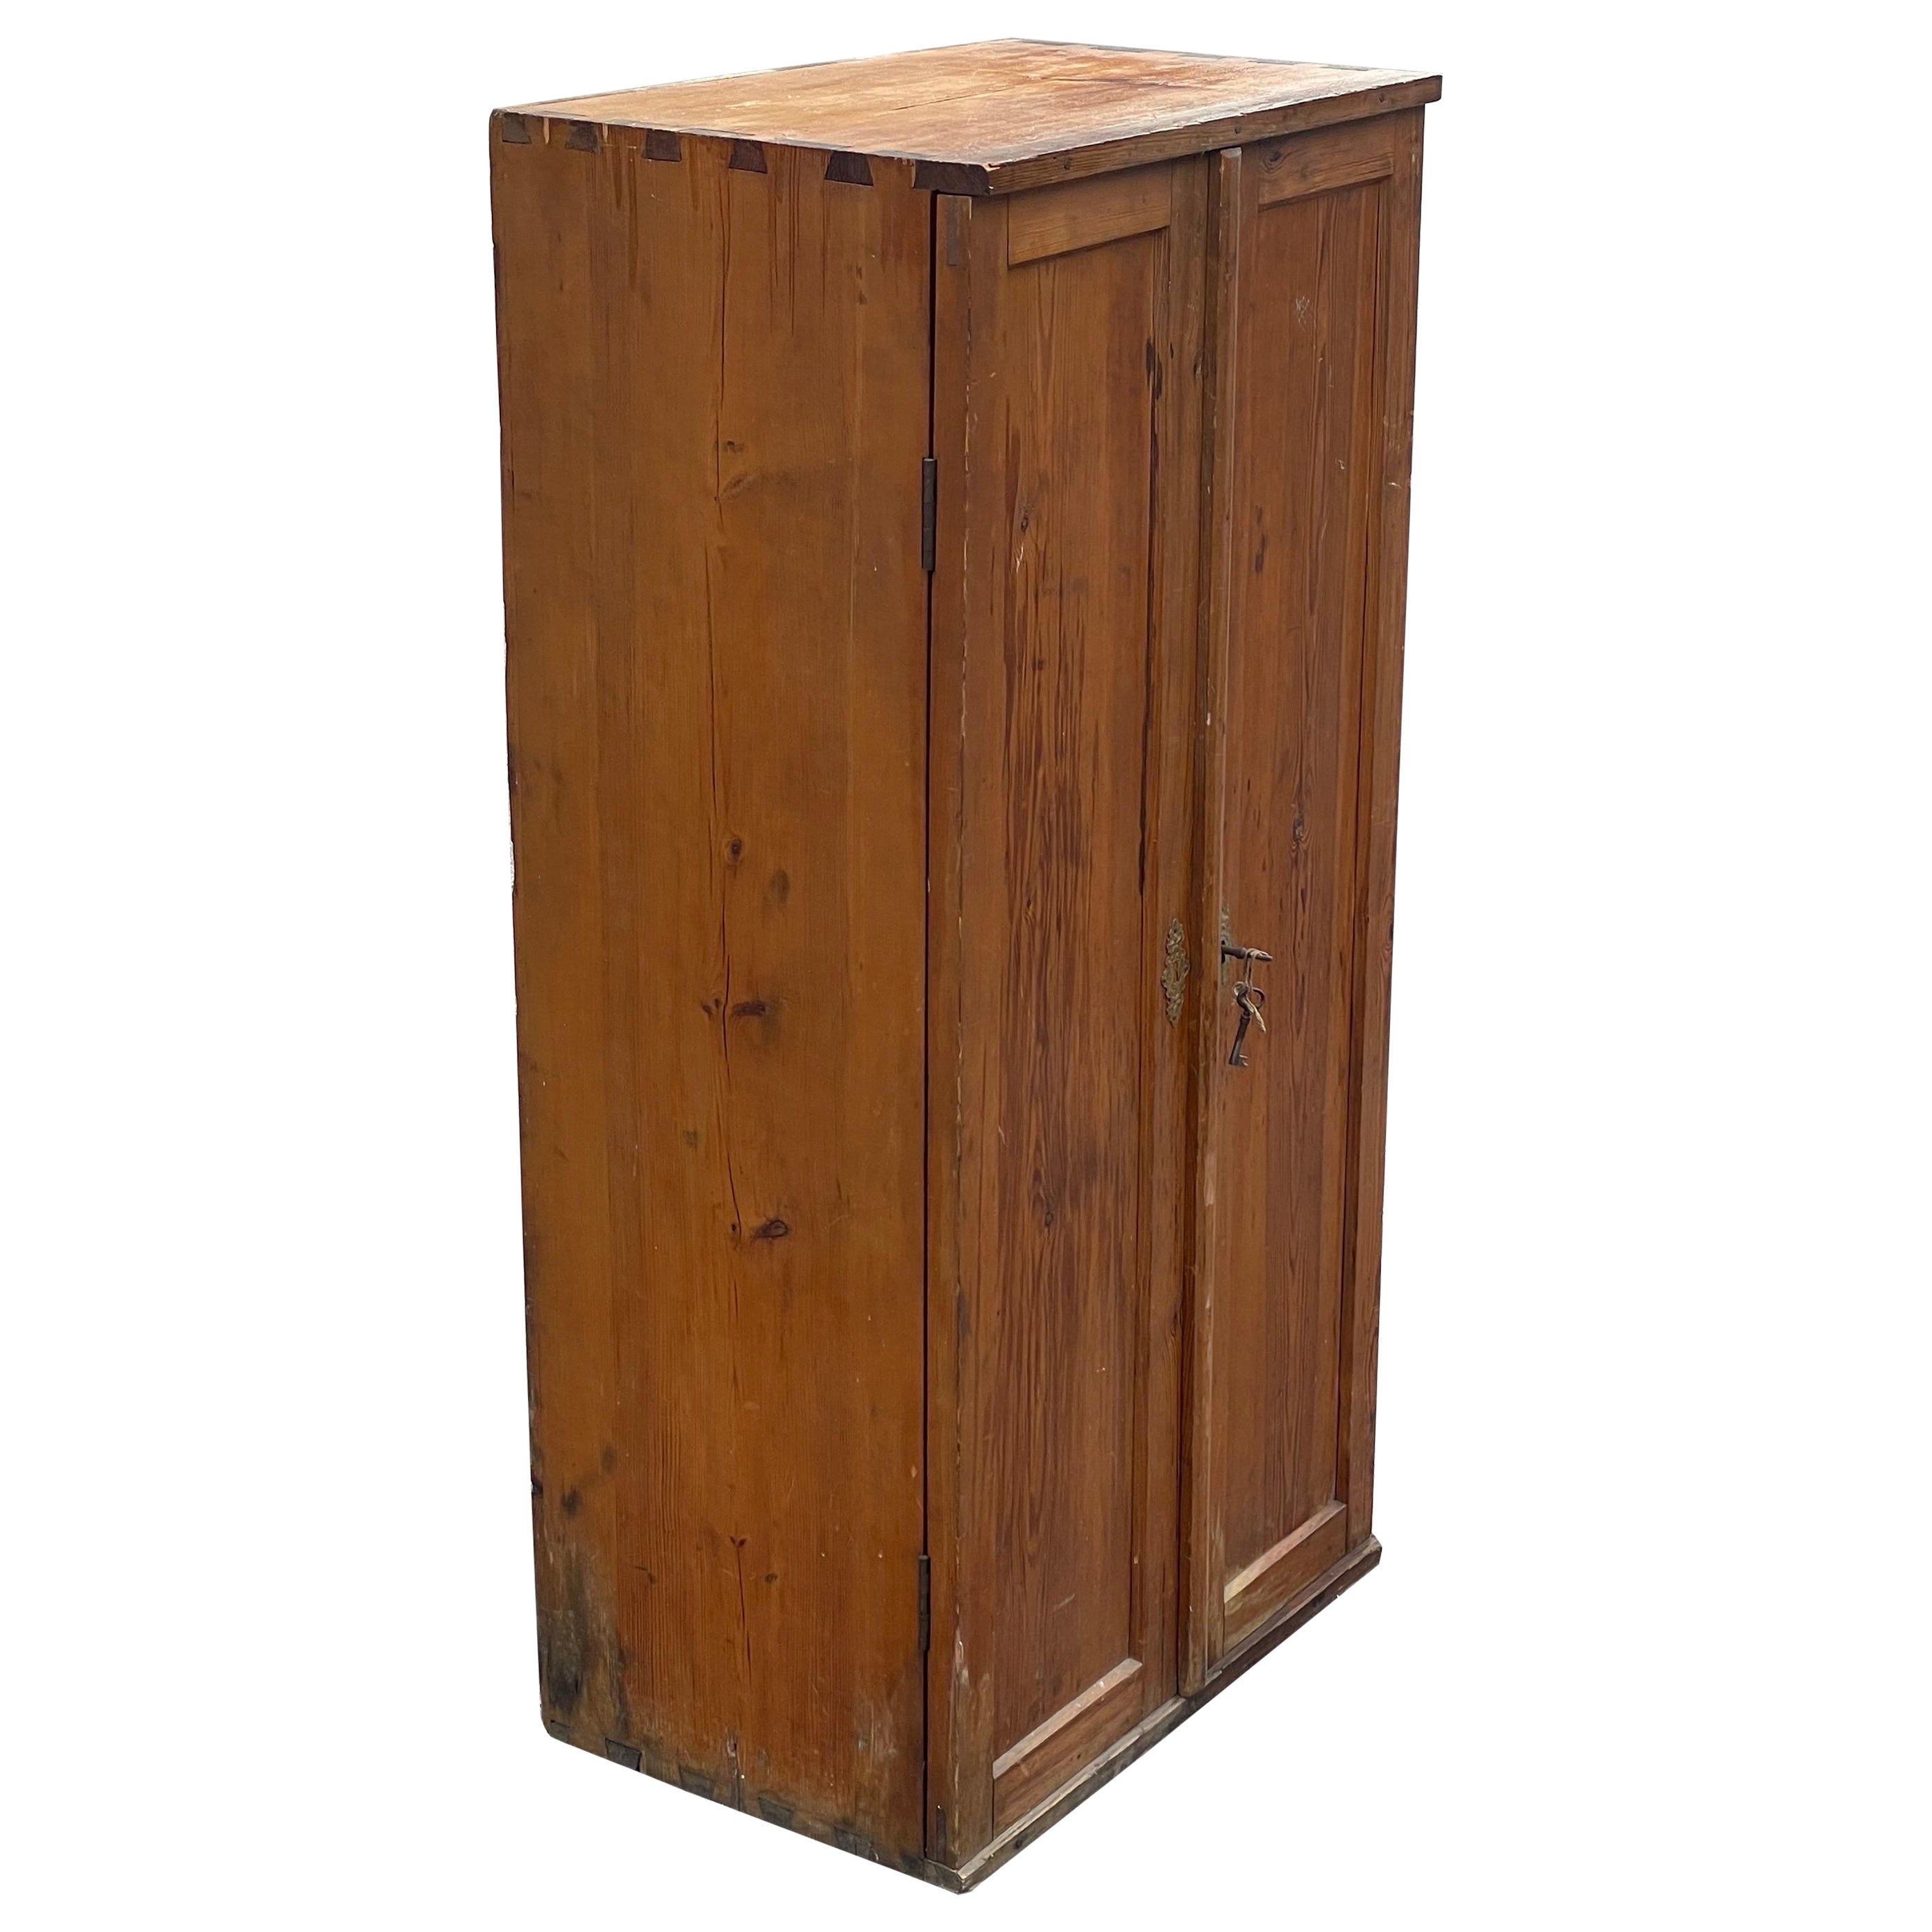 Traditional Danish pine cupboard from the 1930s